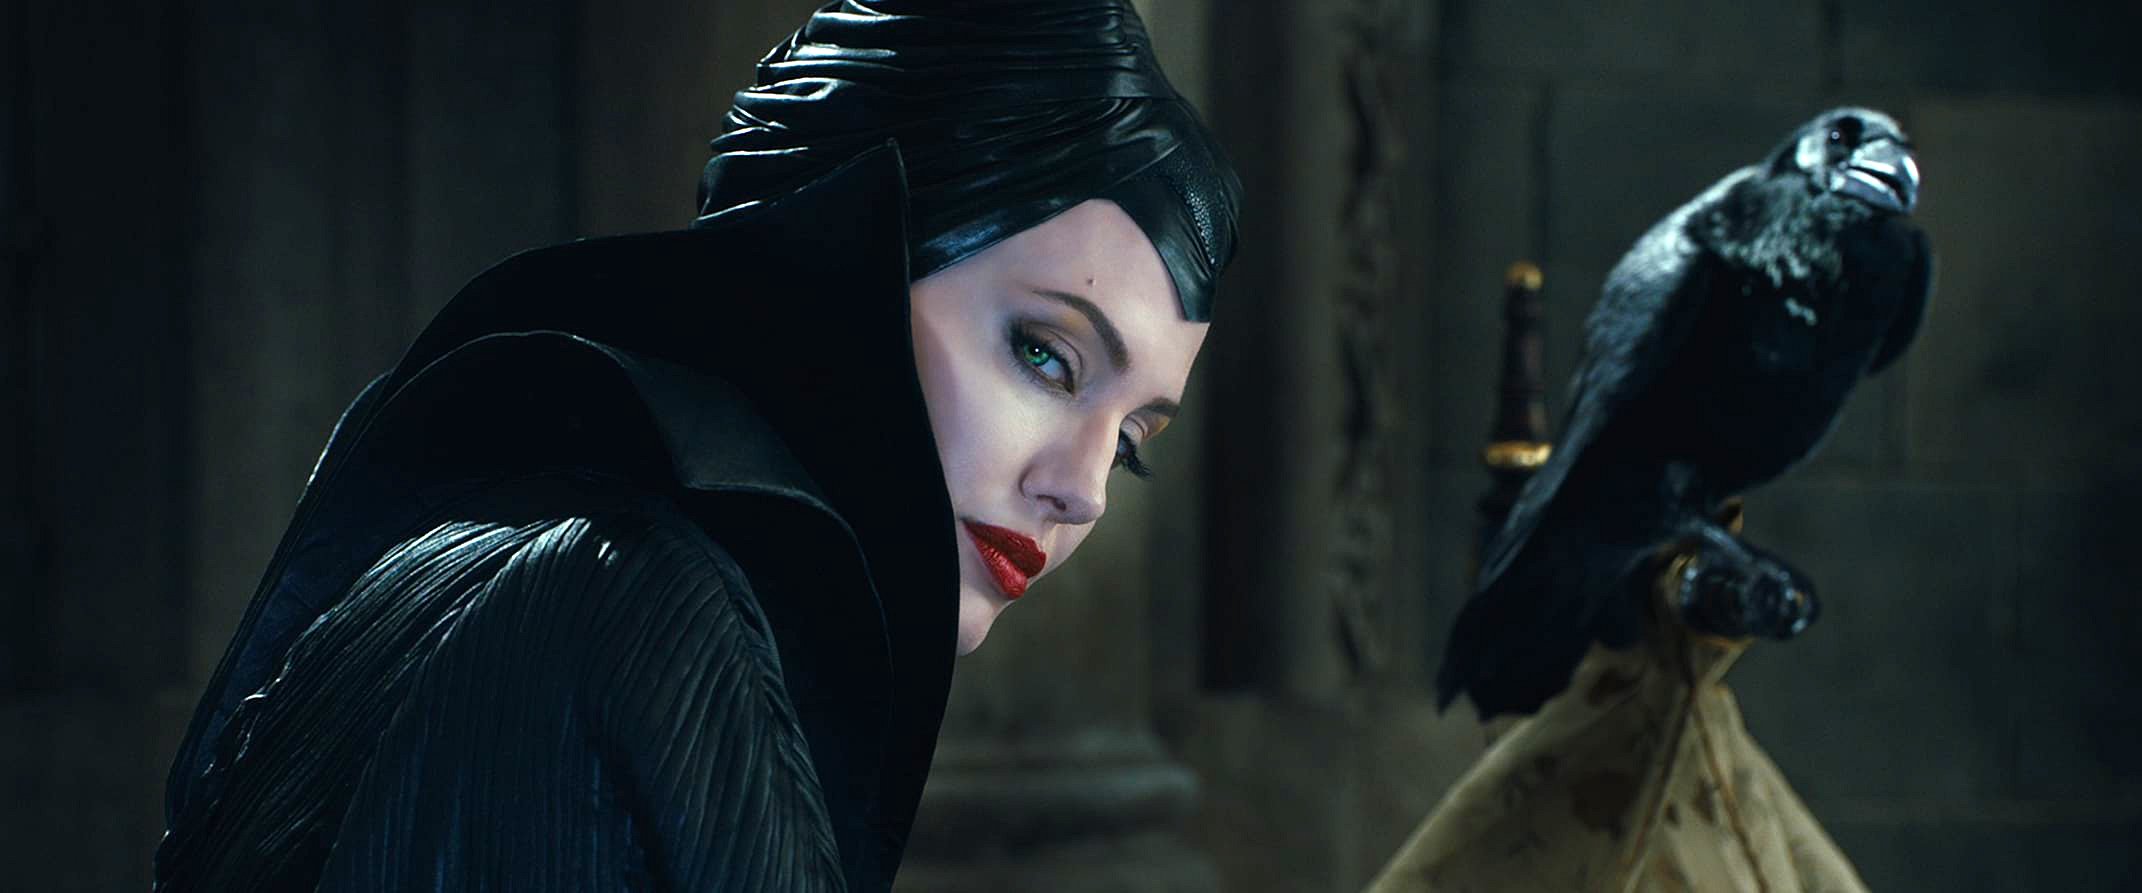 Maleficent A Witch And Her Bird